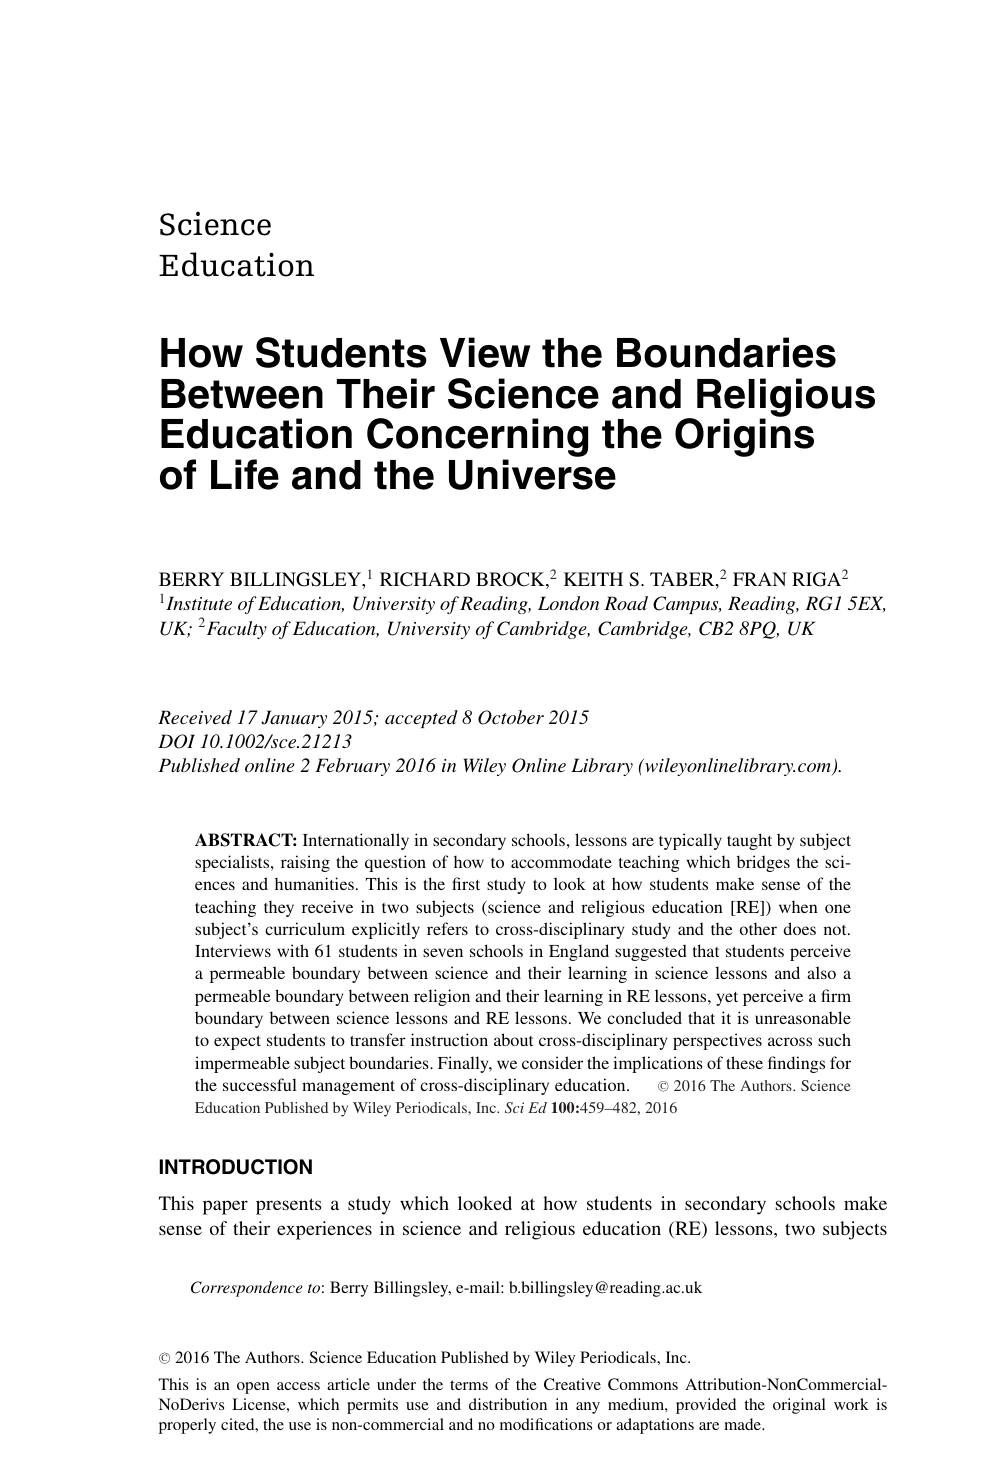 How Students View The Boundaries Between Their Science And